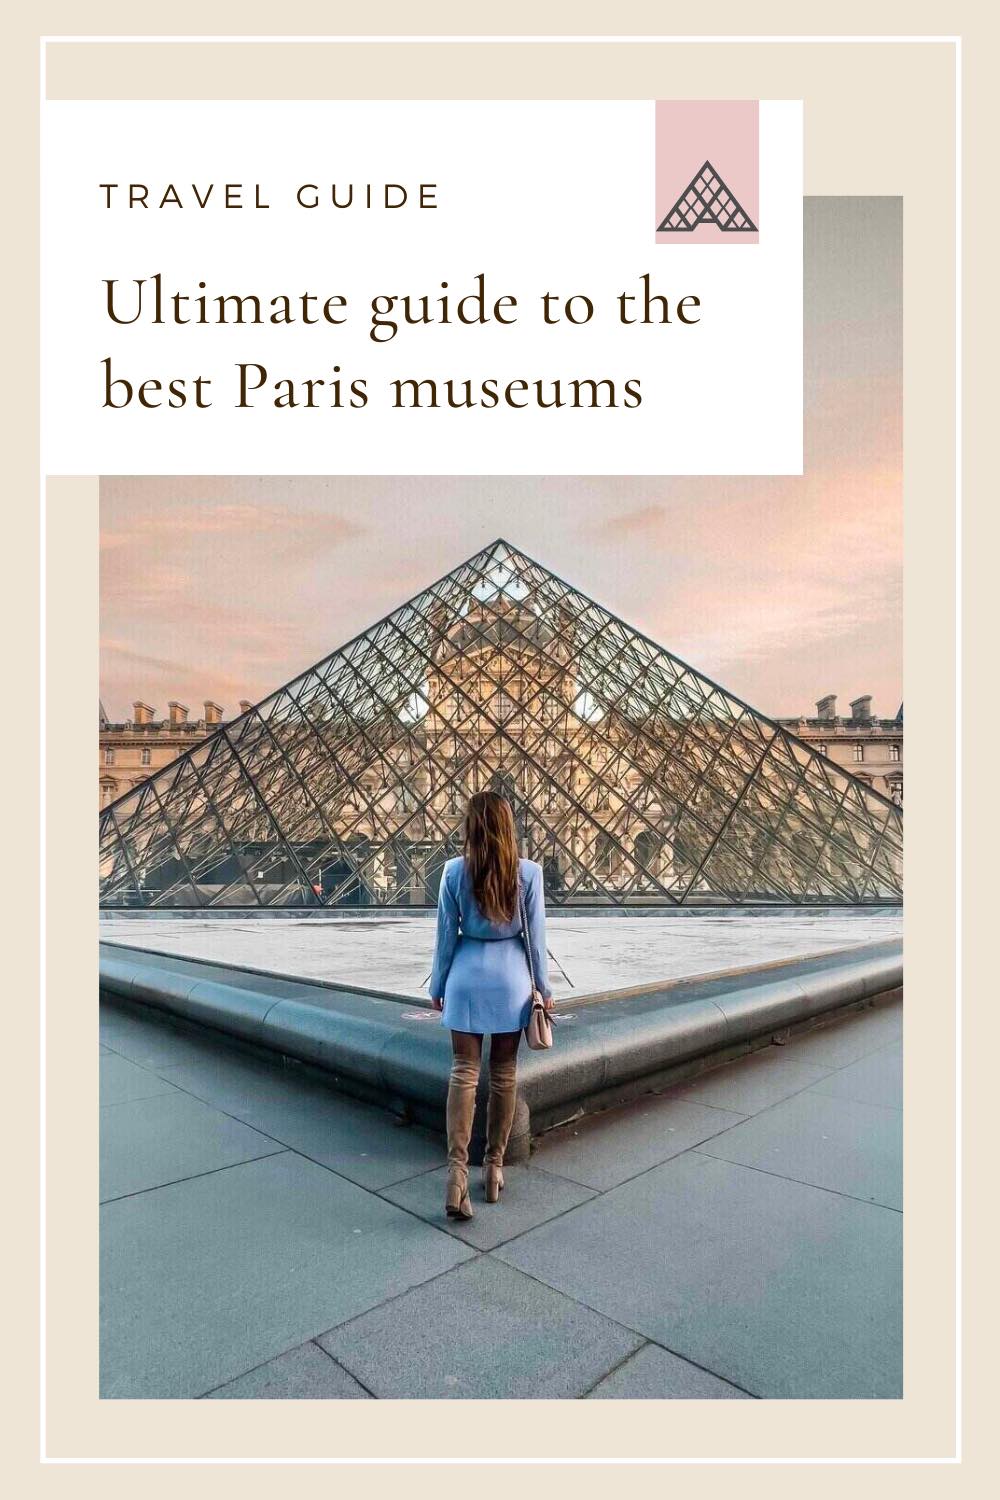 Guide to Best Paris Museums